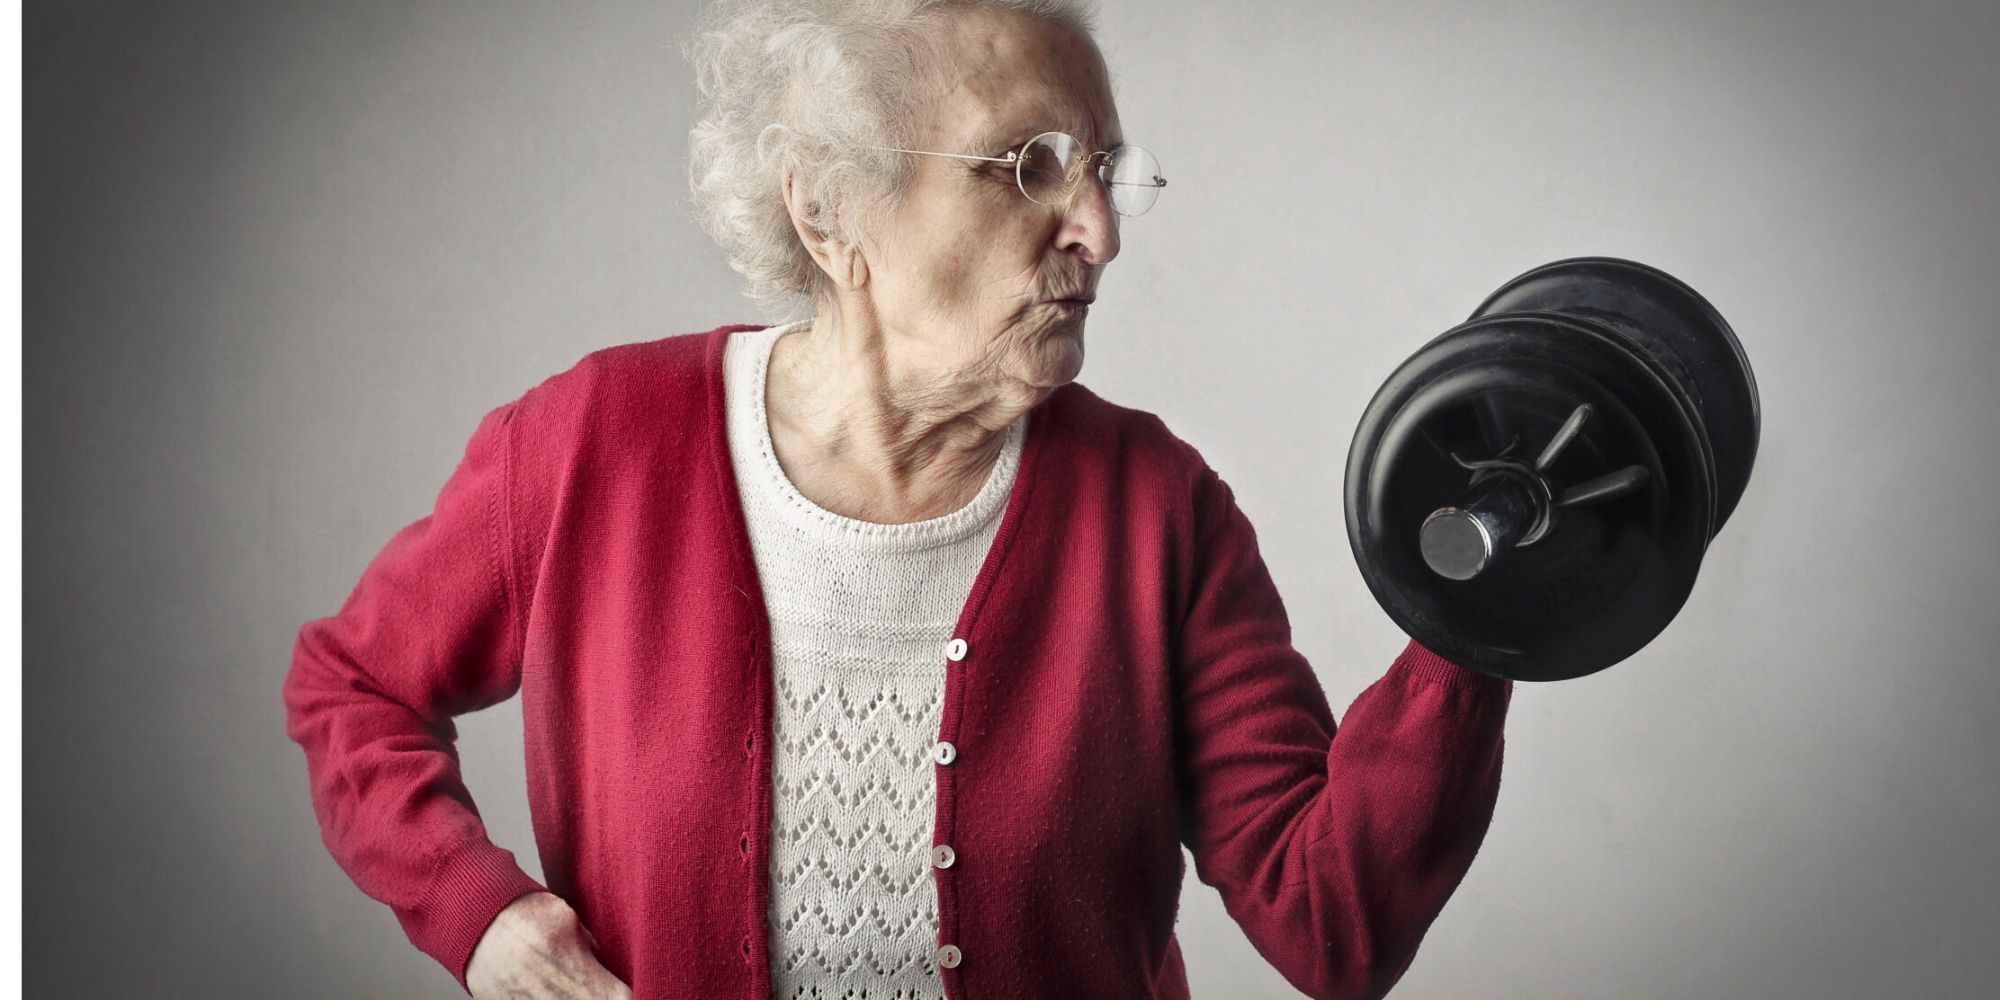 Sarcopenia in Women - Causes, Prevention, and Tips to Improve Muscle Mass